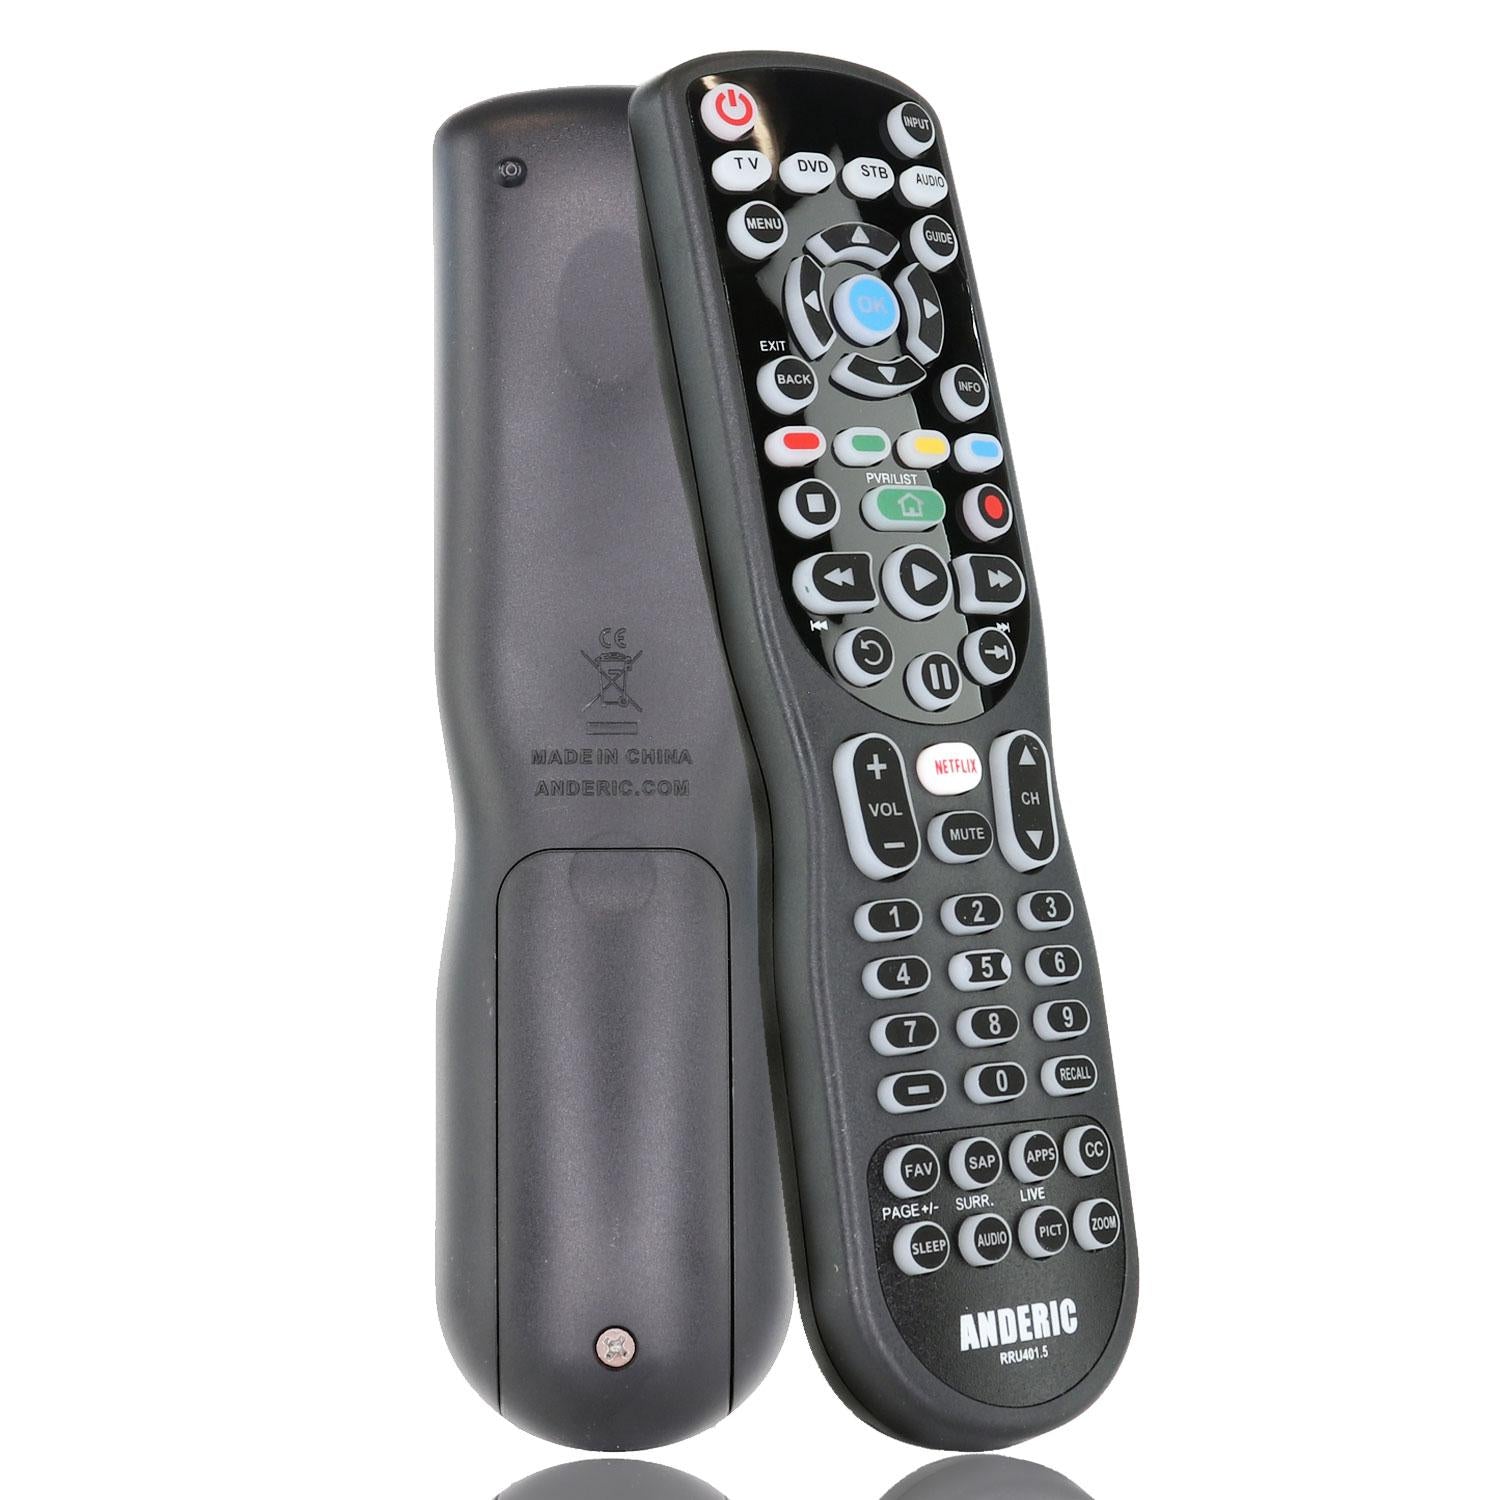 RRU401 4-Device Universal Remote Control with Learning and Macro Functions